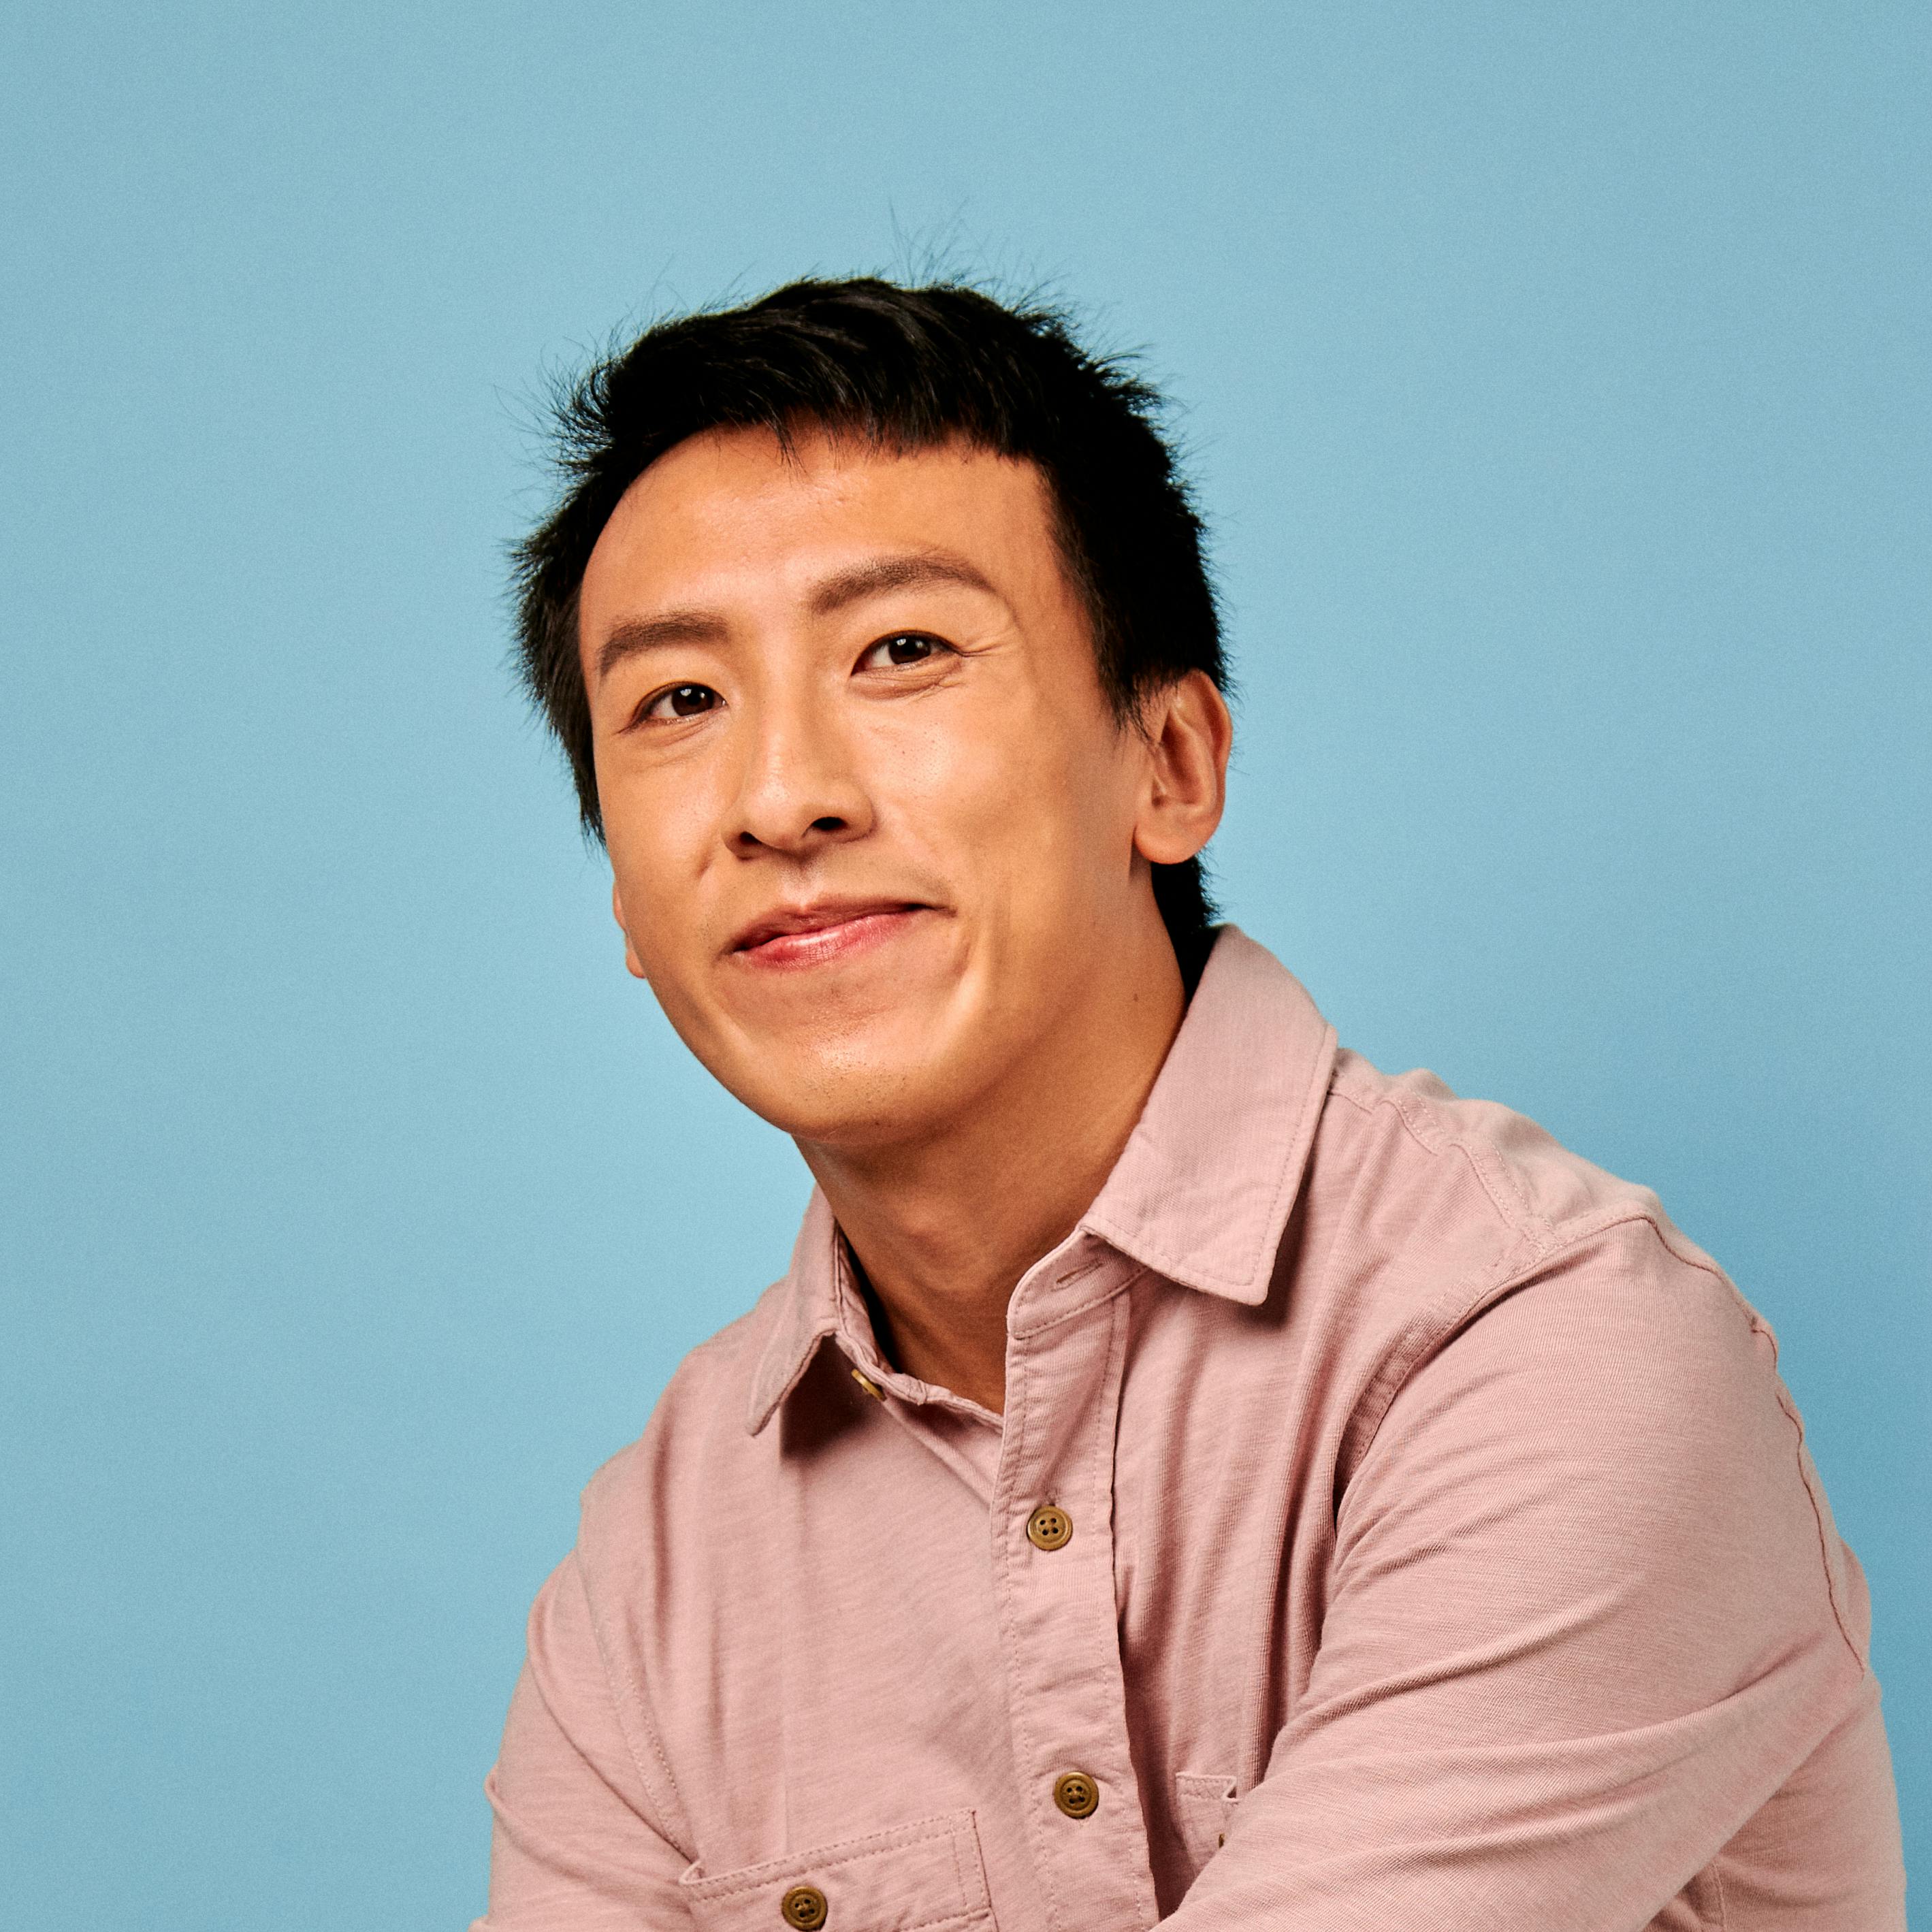 A man of southeast-asian descent smiles in front of blue background.